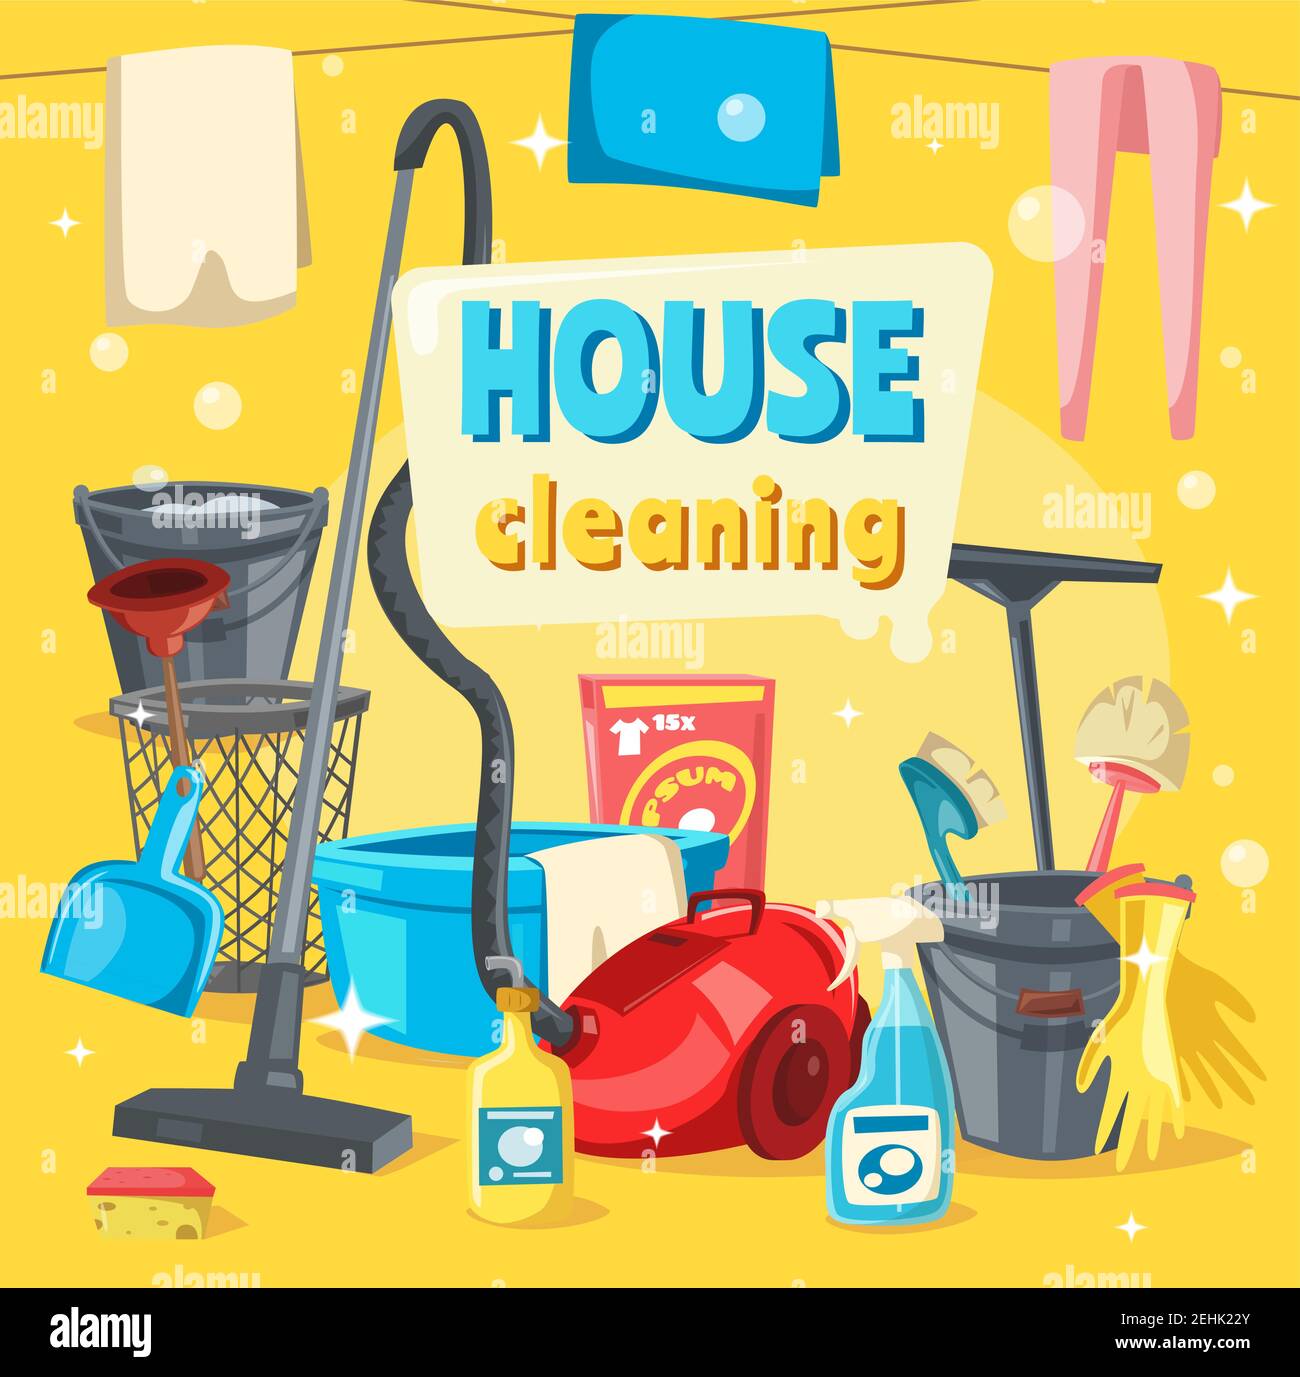 Recurring House Cleaning